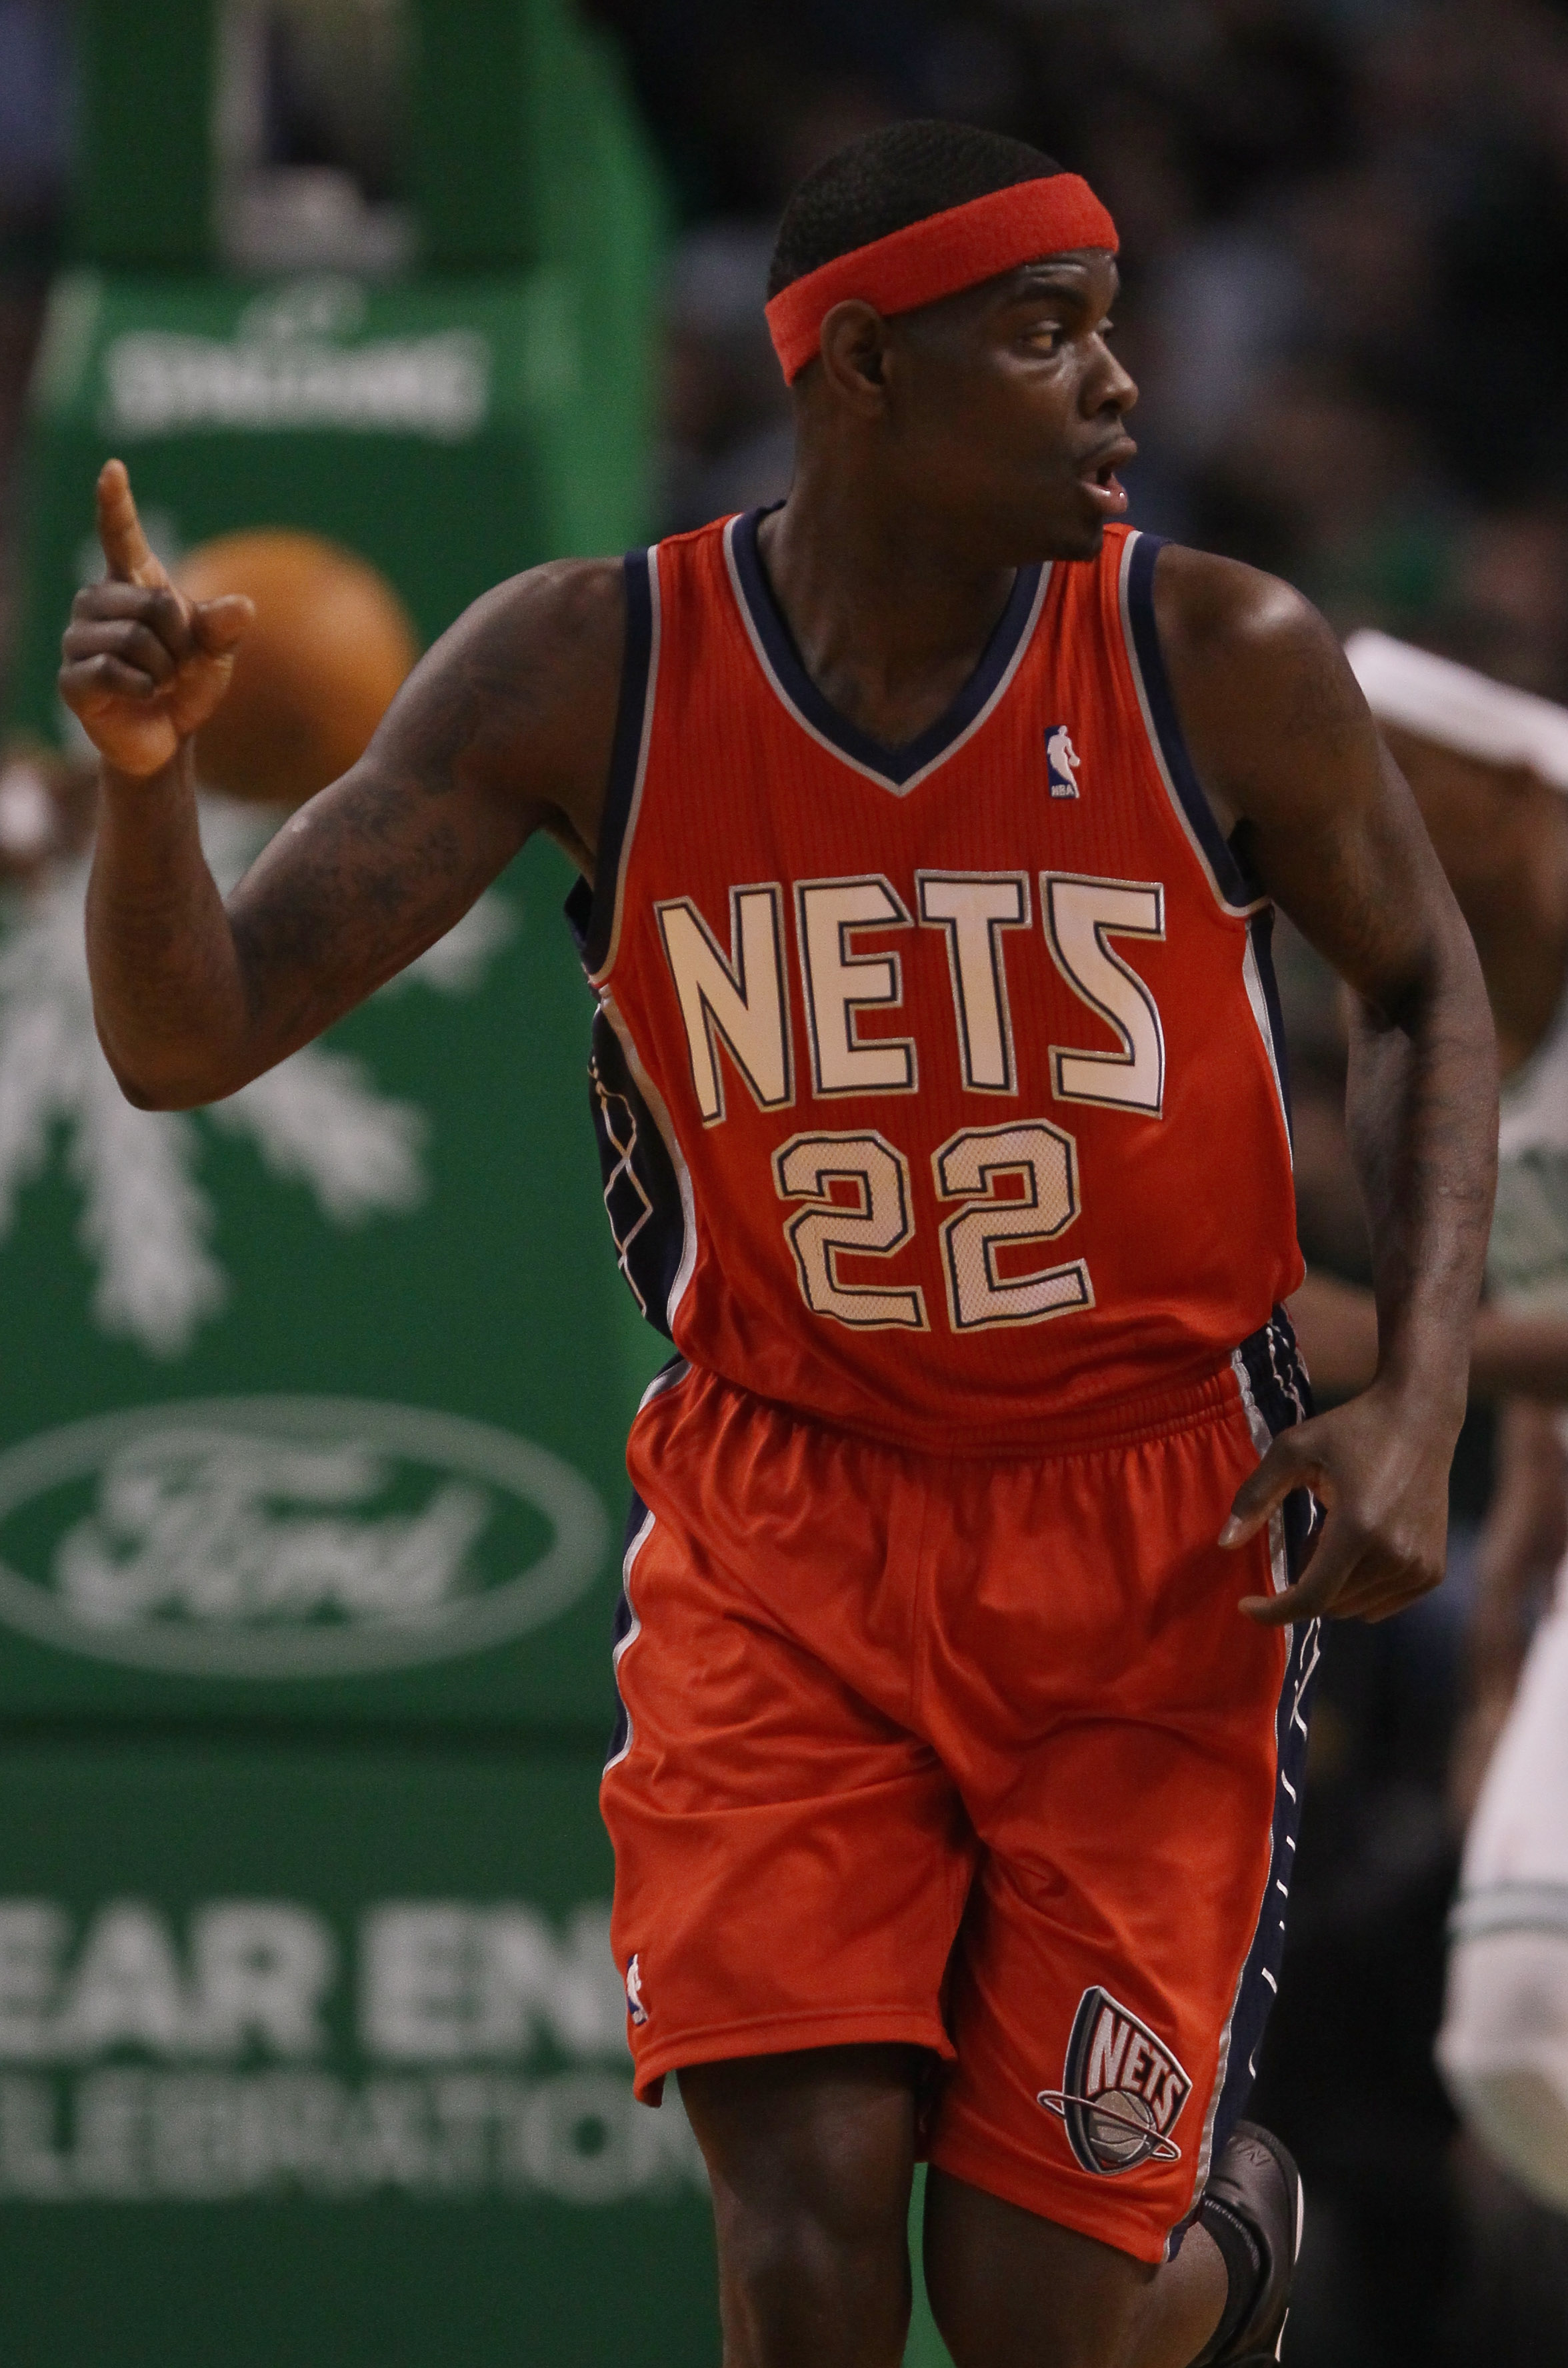 Rondo out, West breaks wrist, but Shaq leads Celtics to win over Nets